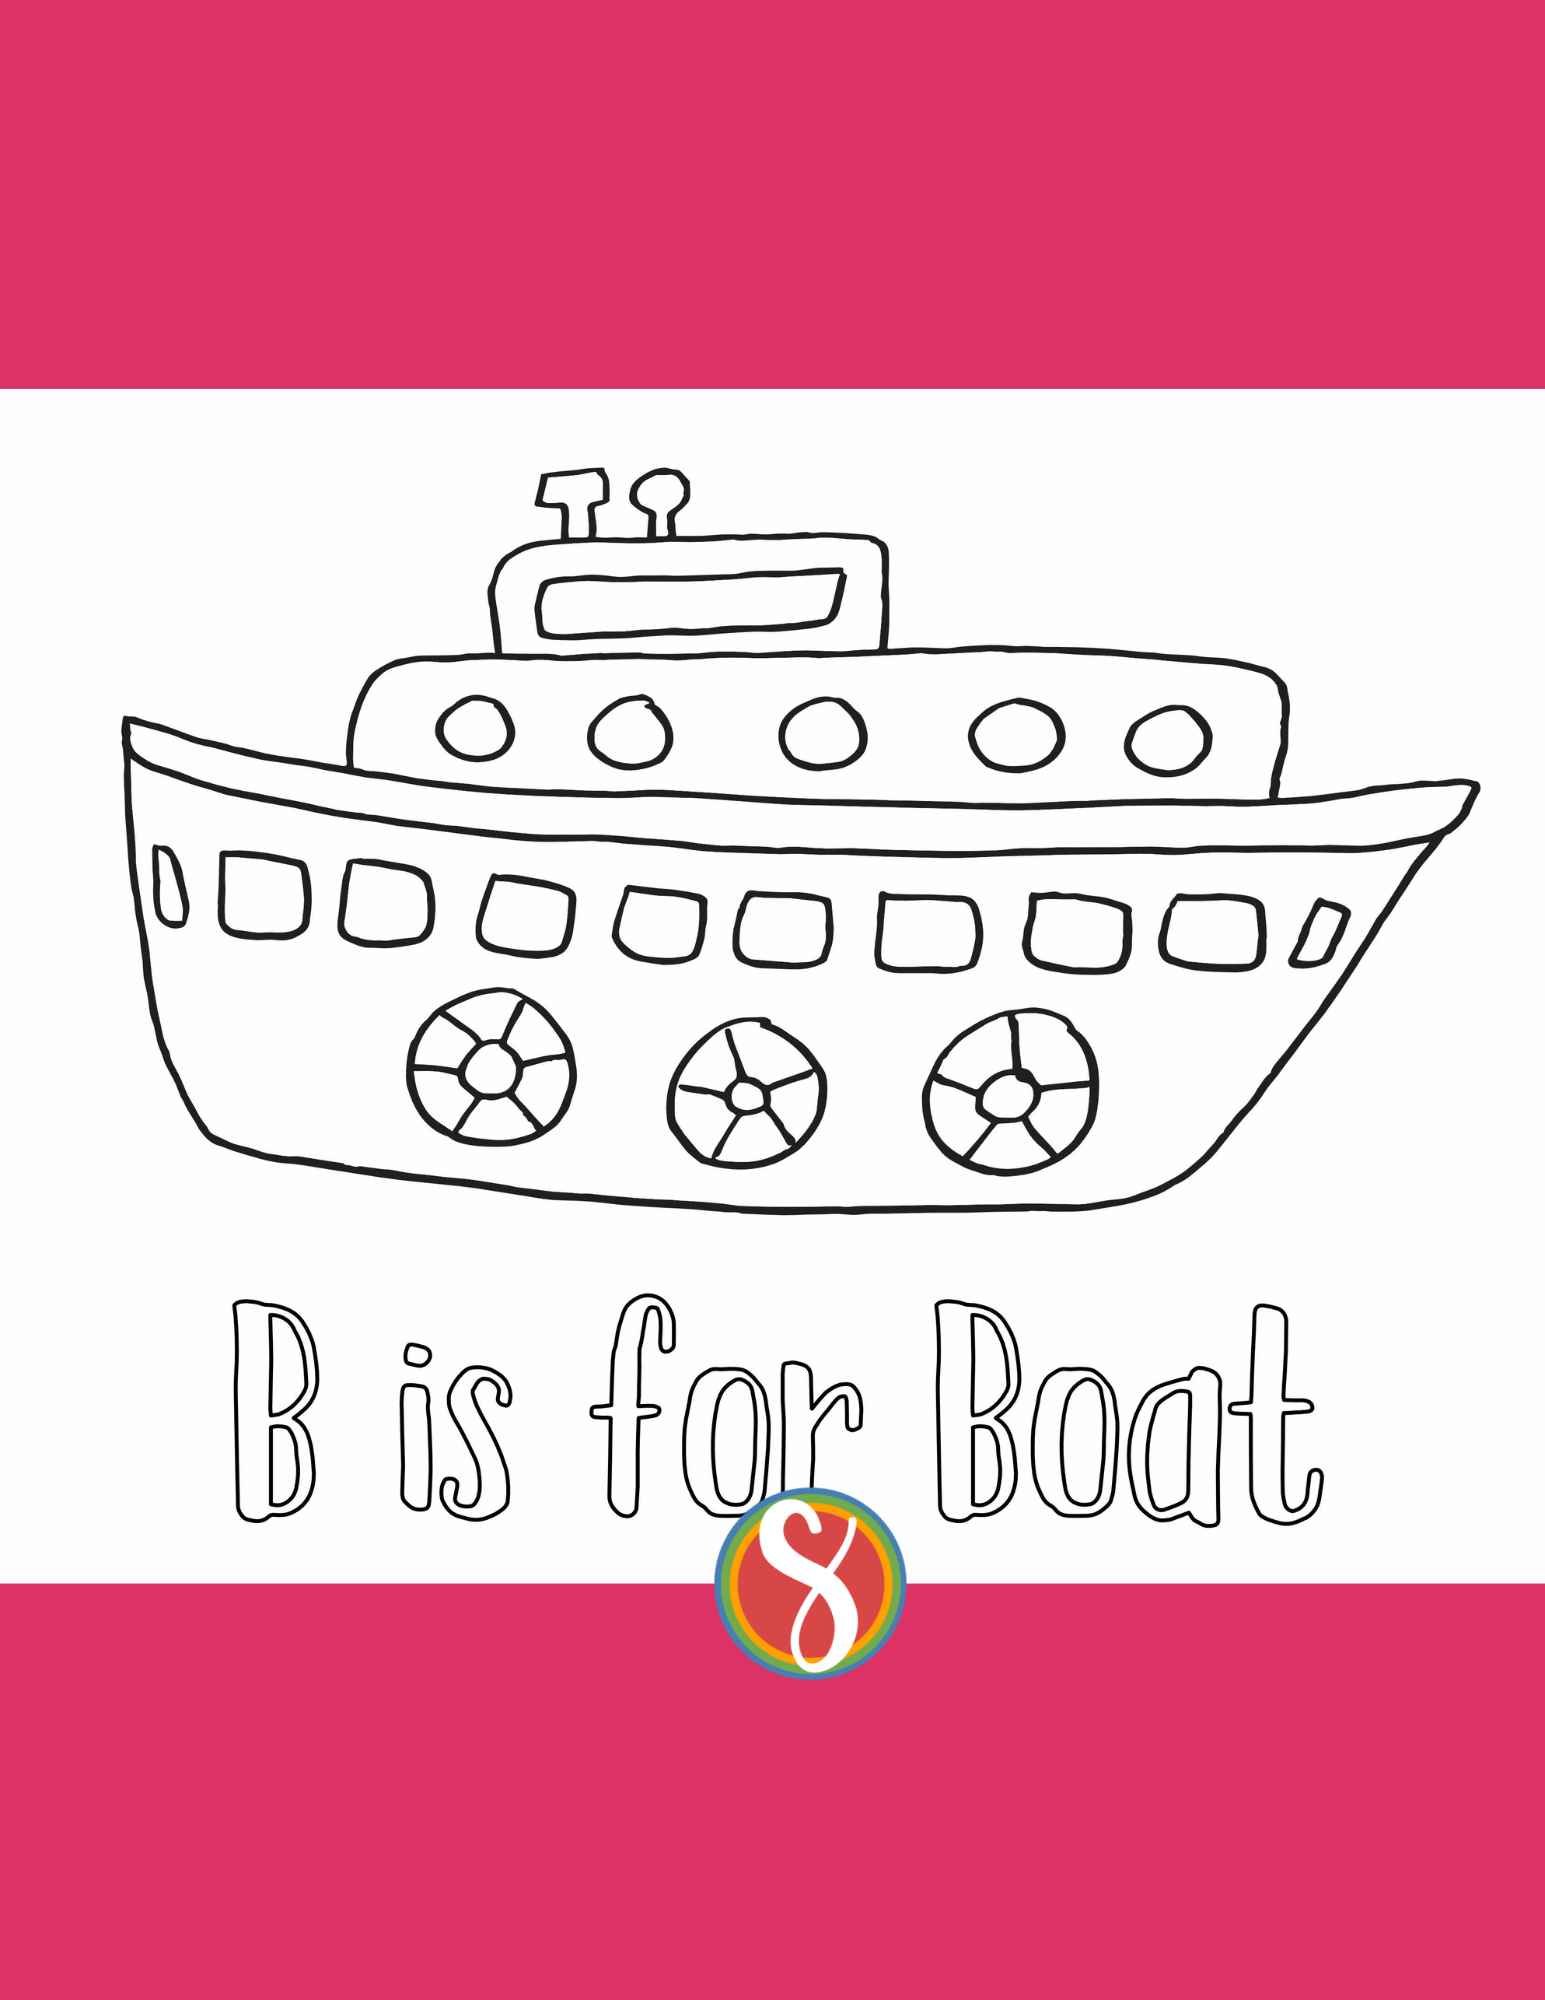 boat coloring page with big boat drawn simply and colorable text "b is for boat"